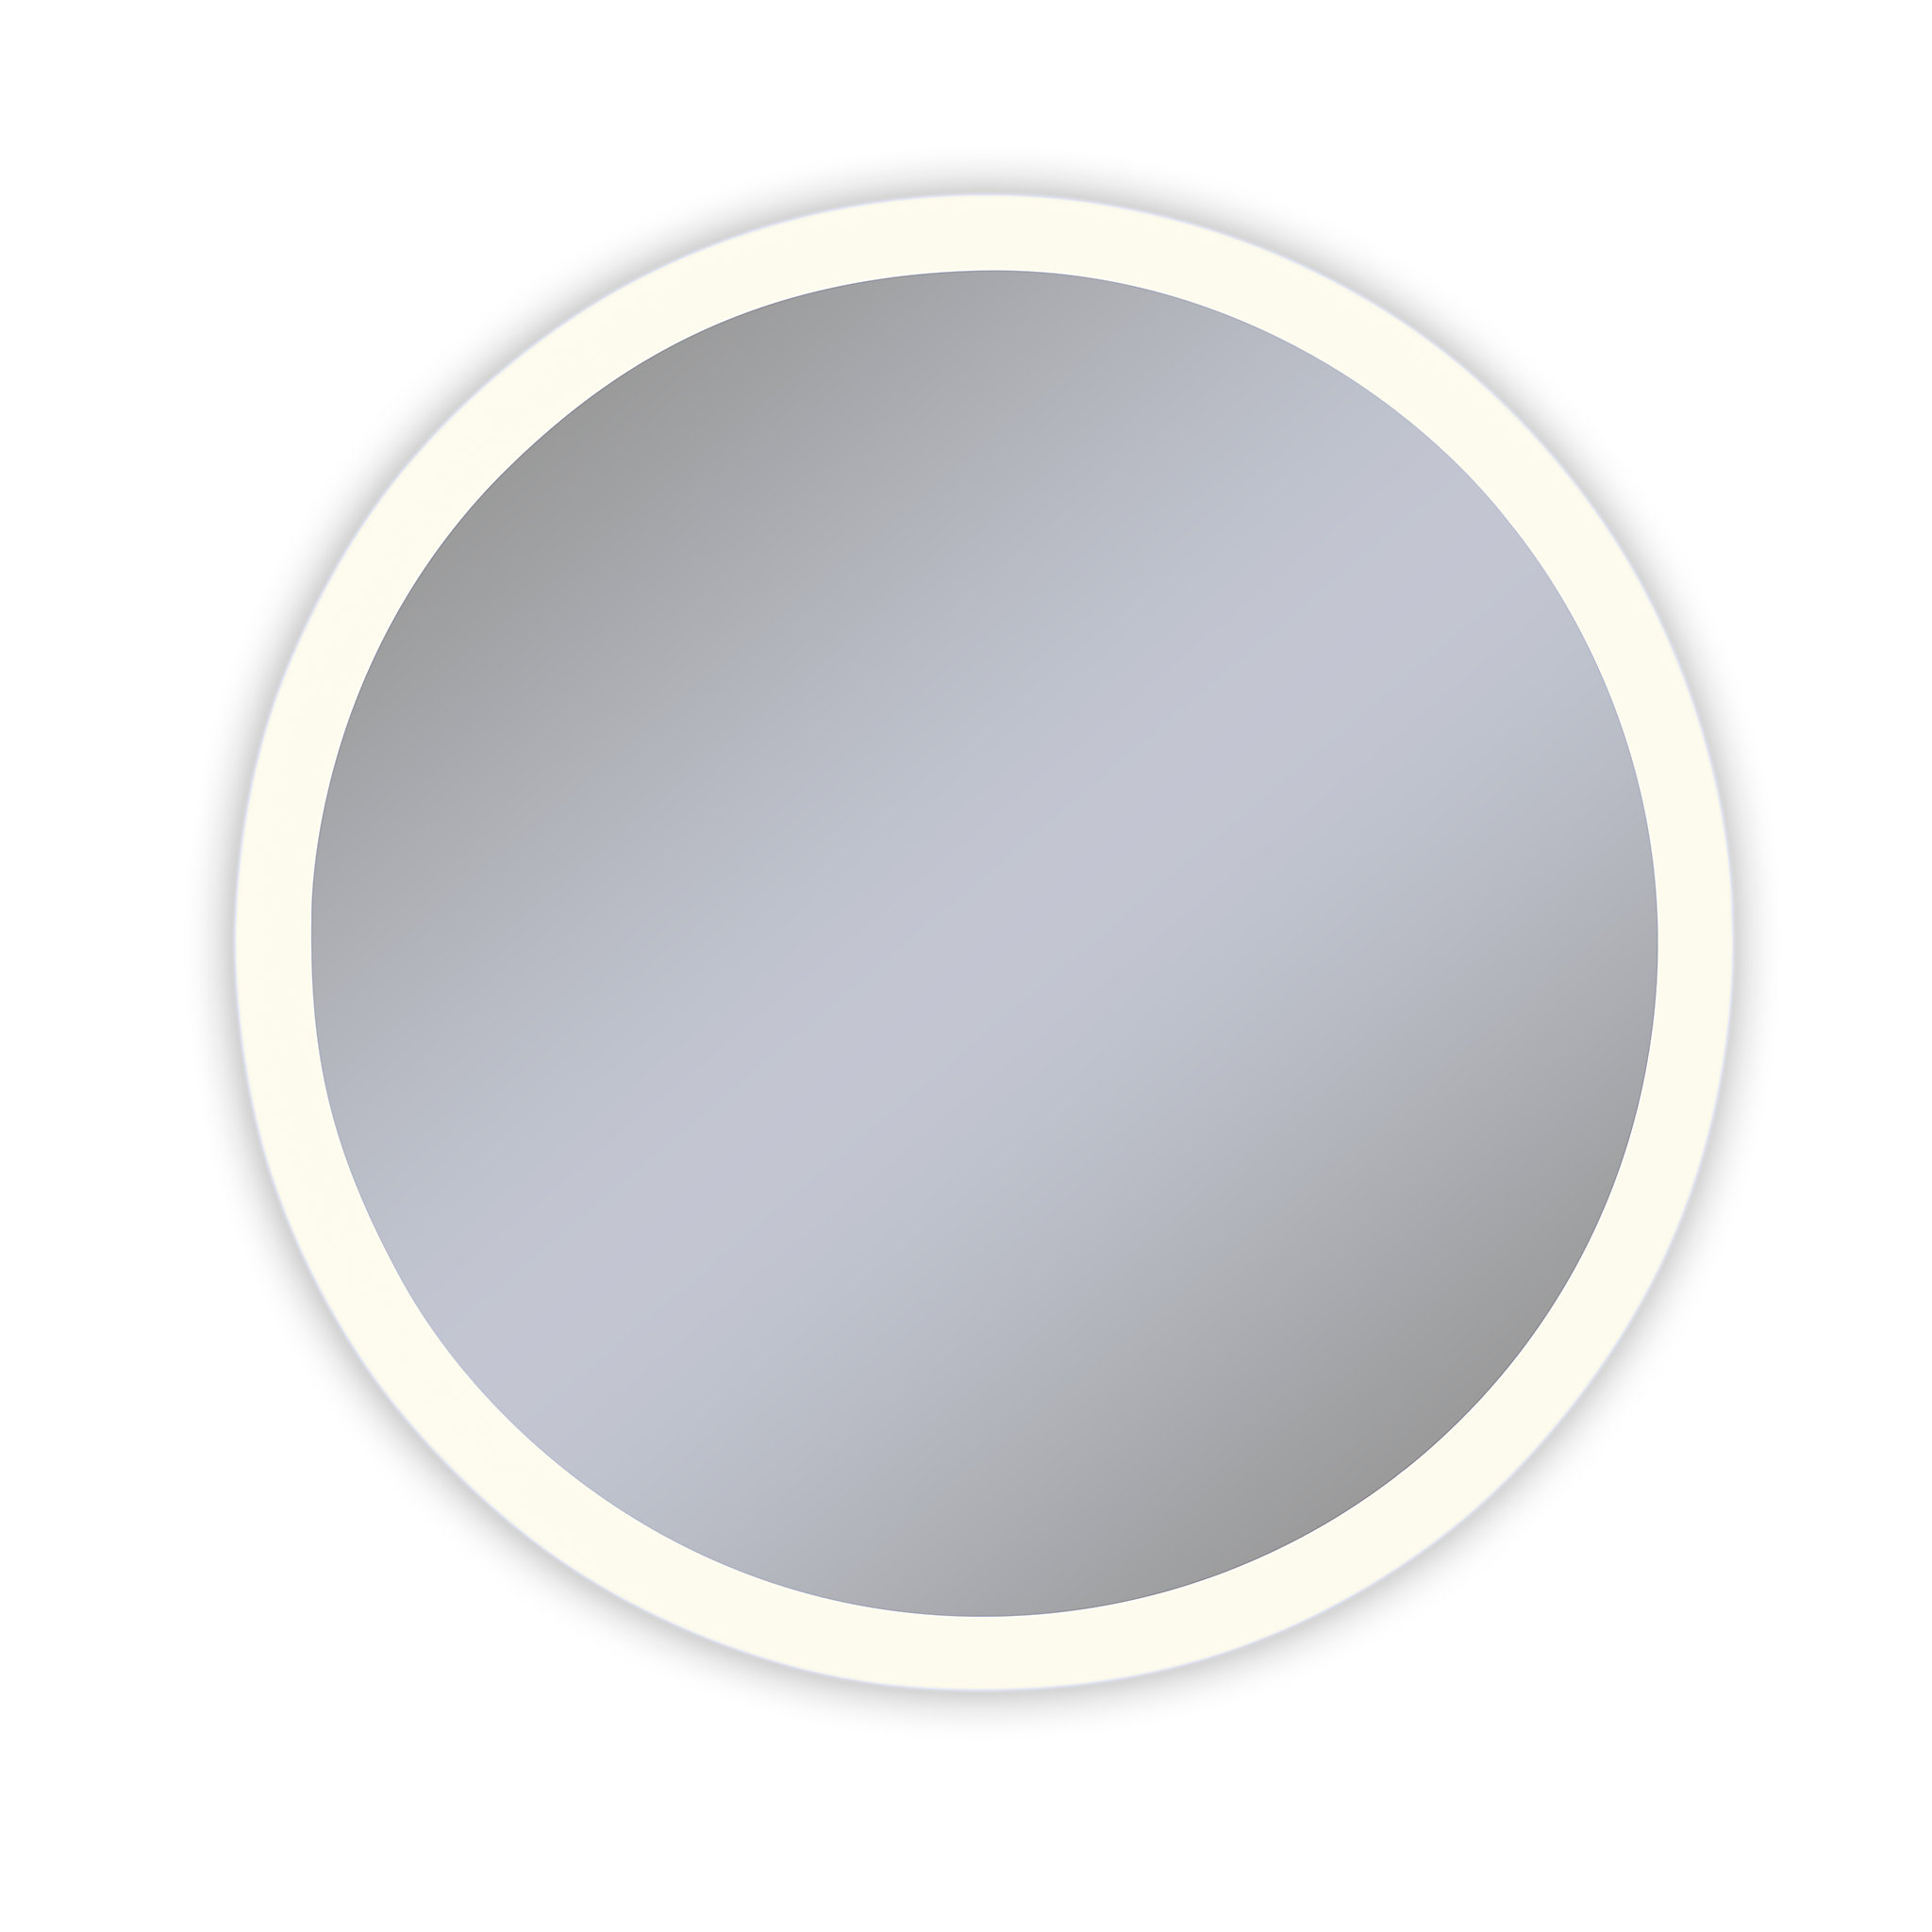 Robern YM0040CPFPD3Vitality Lighted Mirror, 40" Circle, Perimeter Light Pattern, 2700K Temperature (Warm Light), Dimmable, Defog